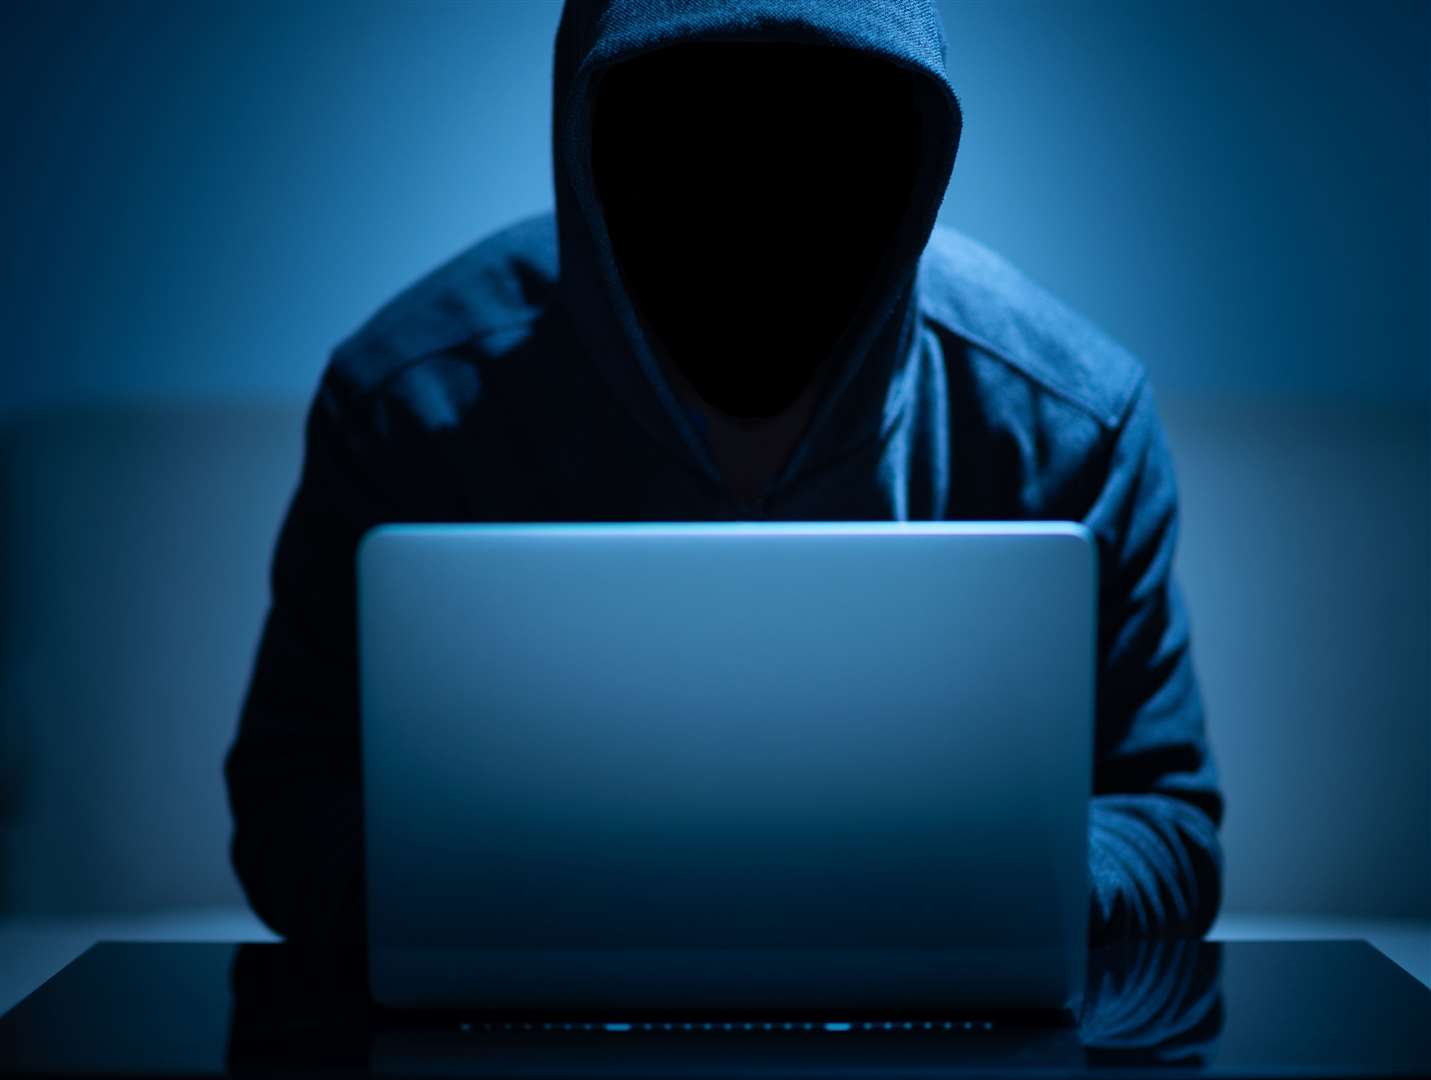 There could be a risk of massive problems if data was lost of hacked. Stock picture